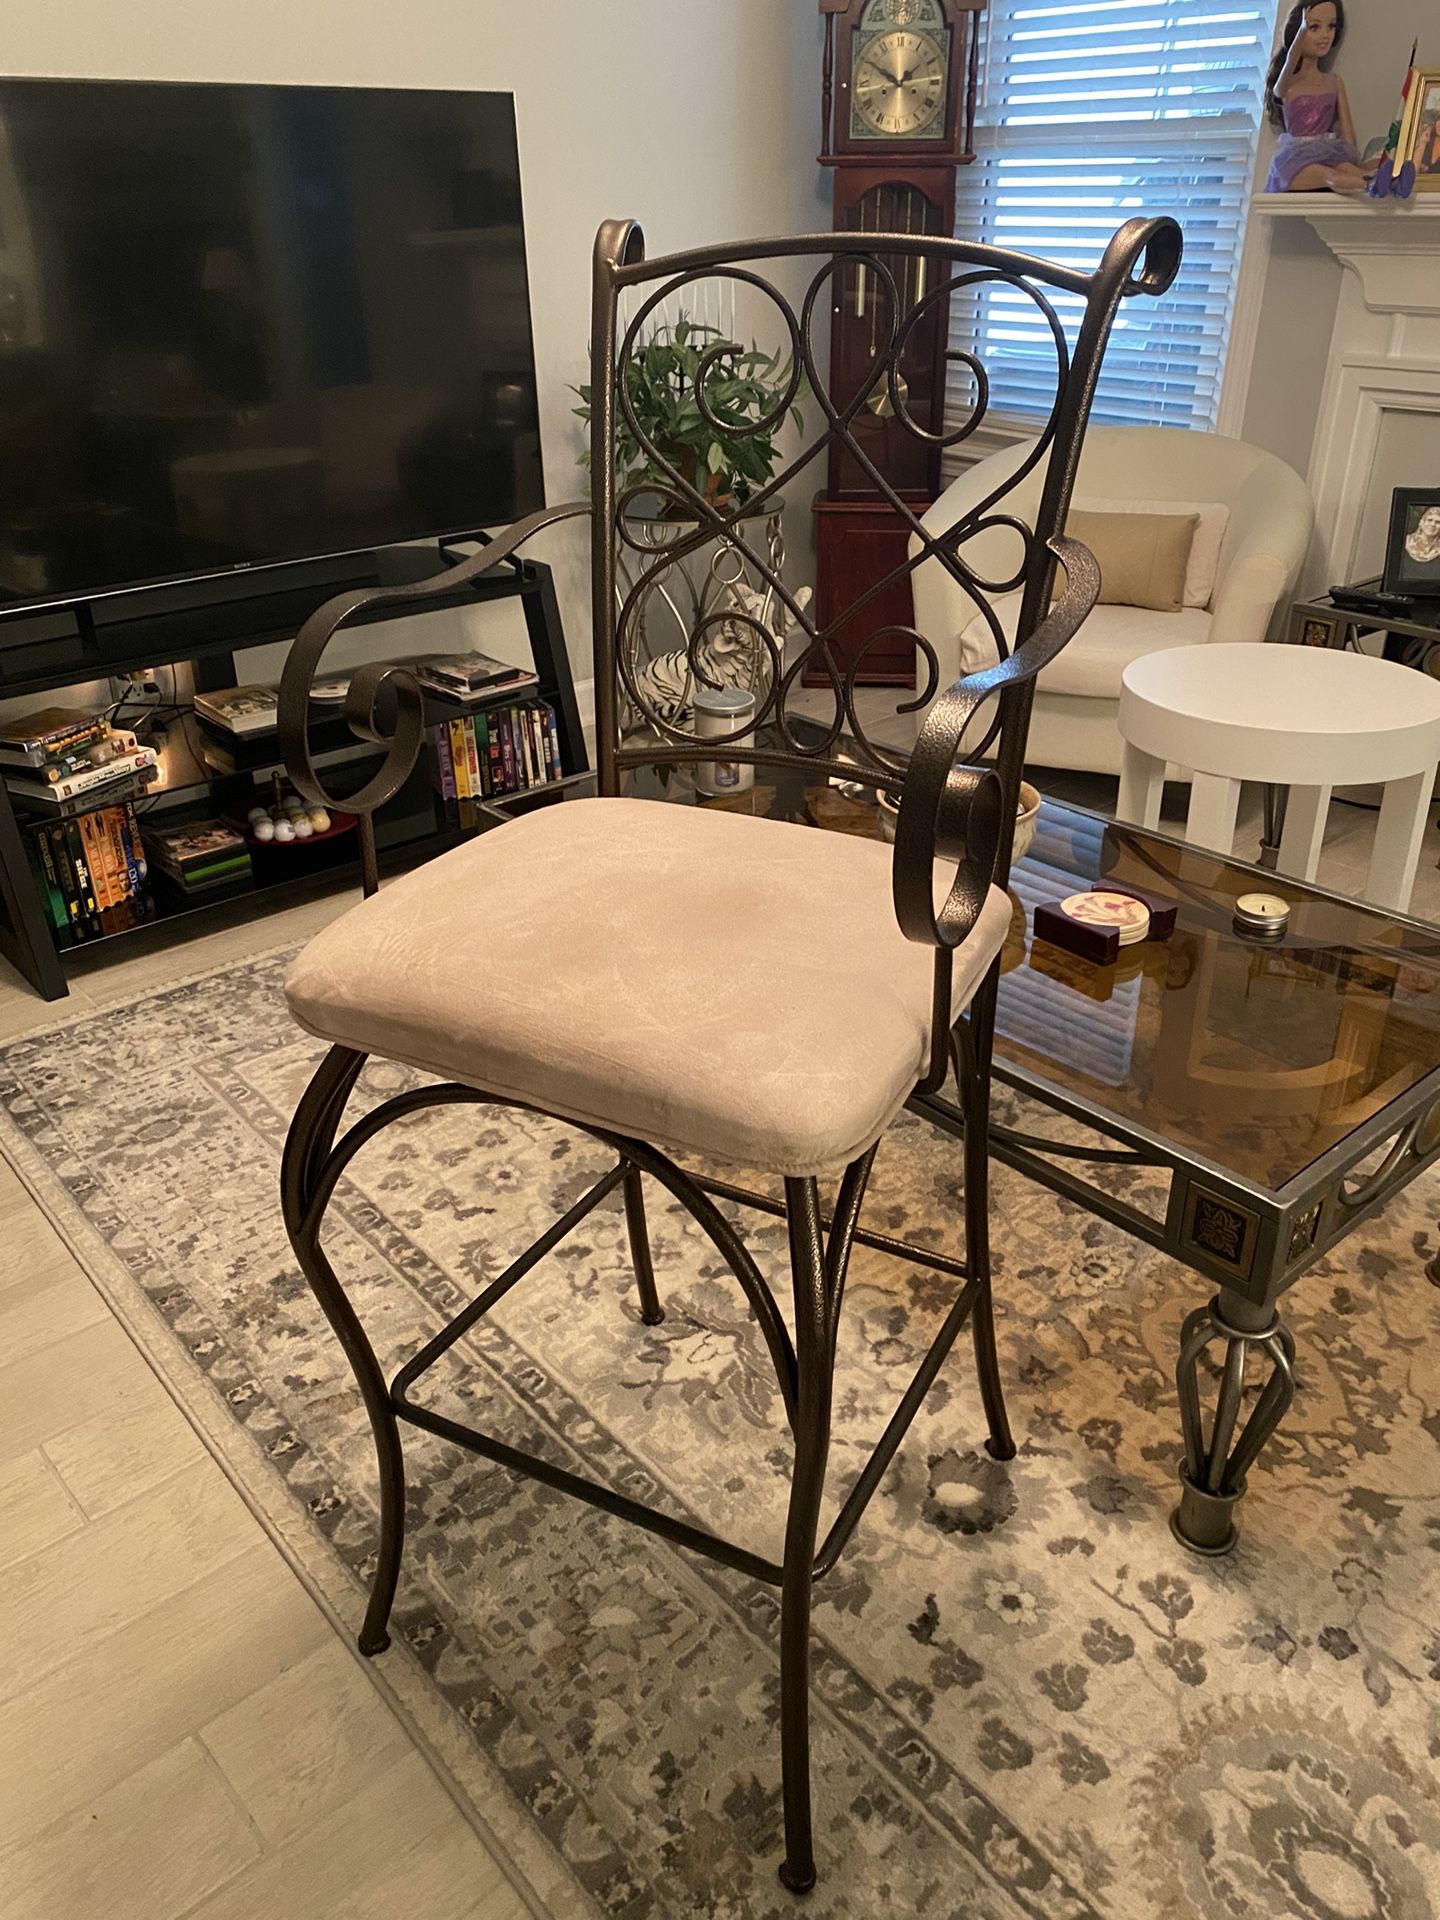 Brand new stool chair never been used